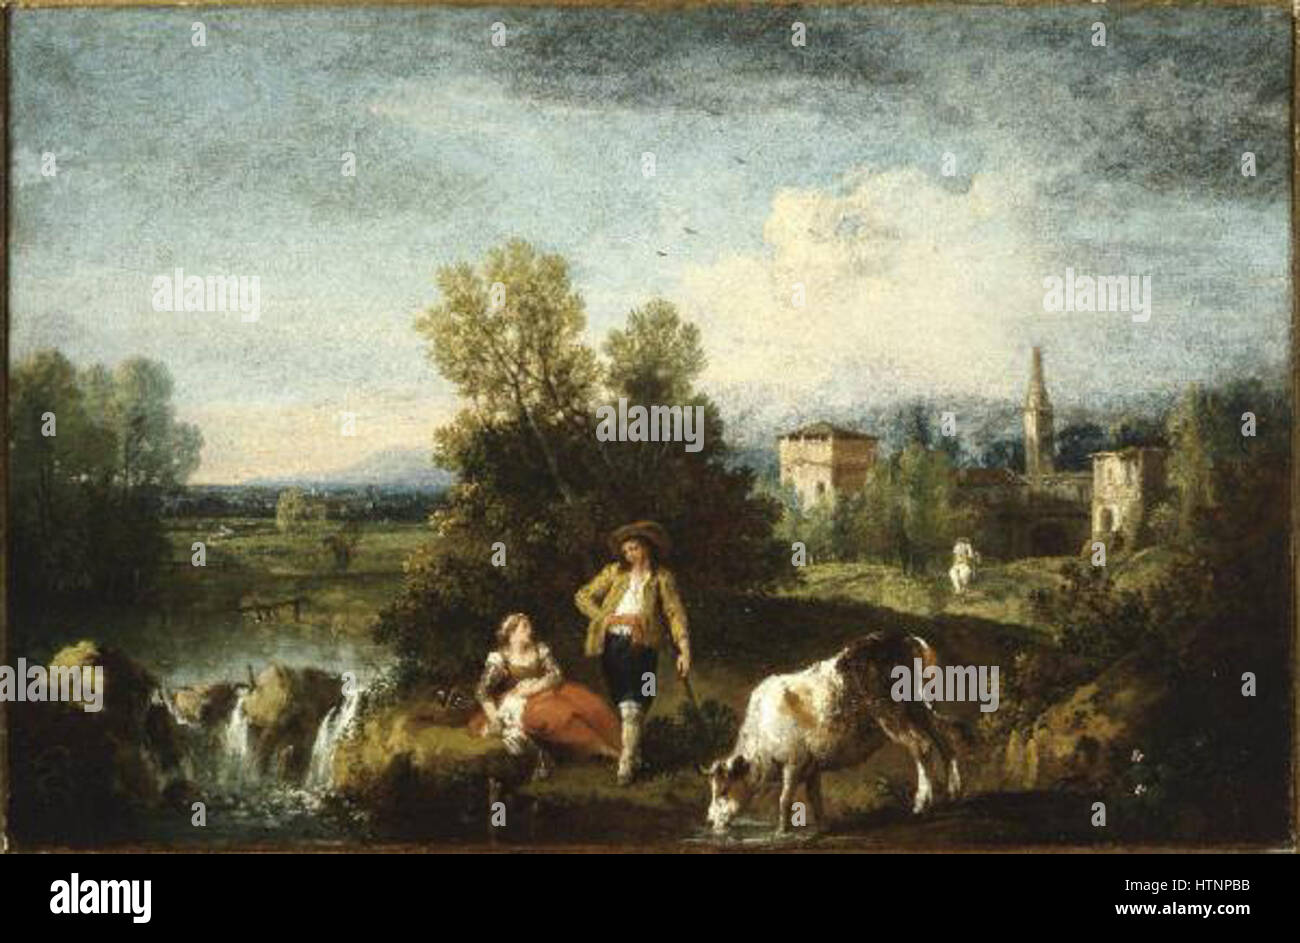 Landscape with Figures and Stream Stock Photo